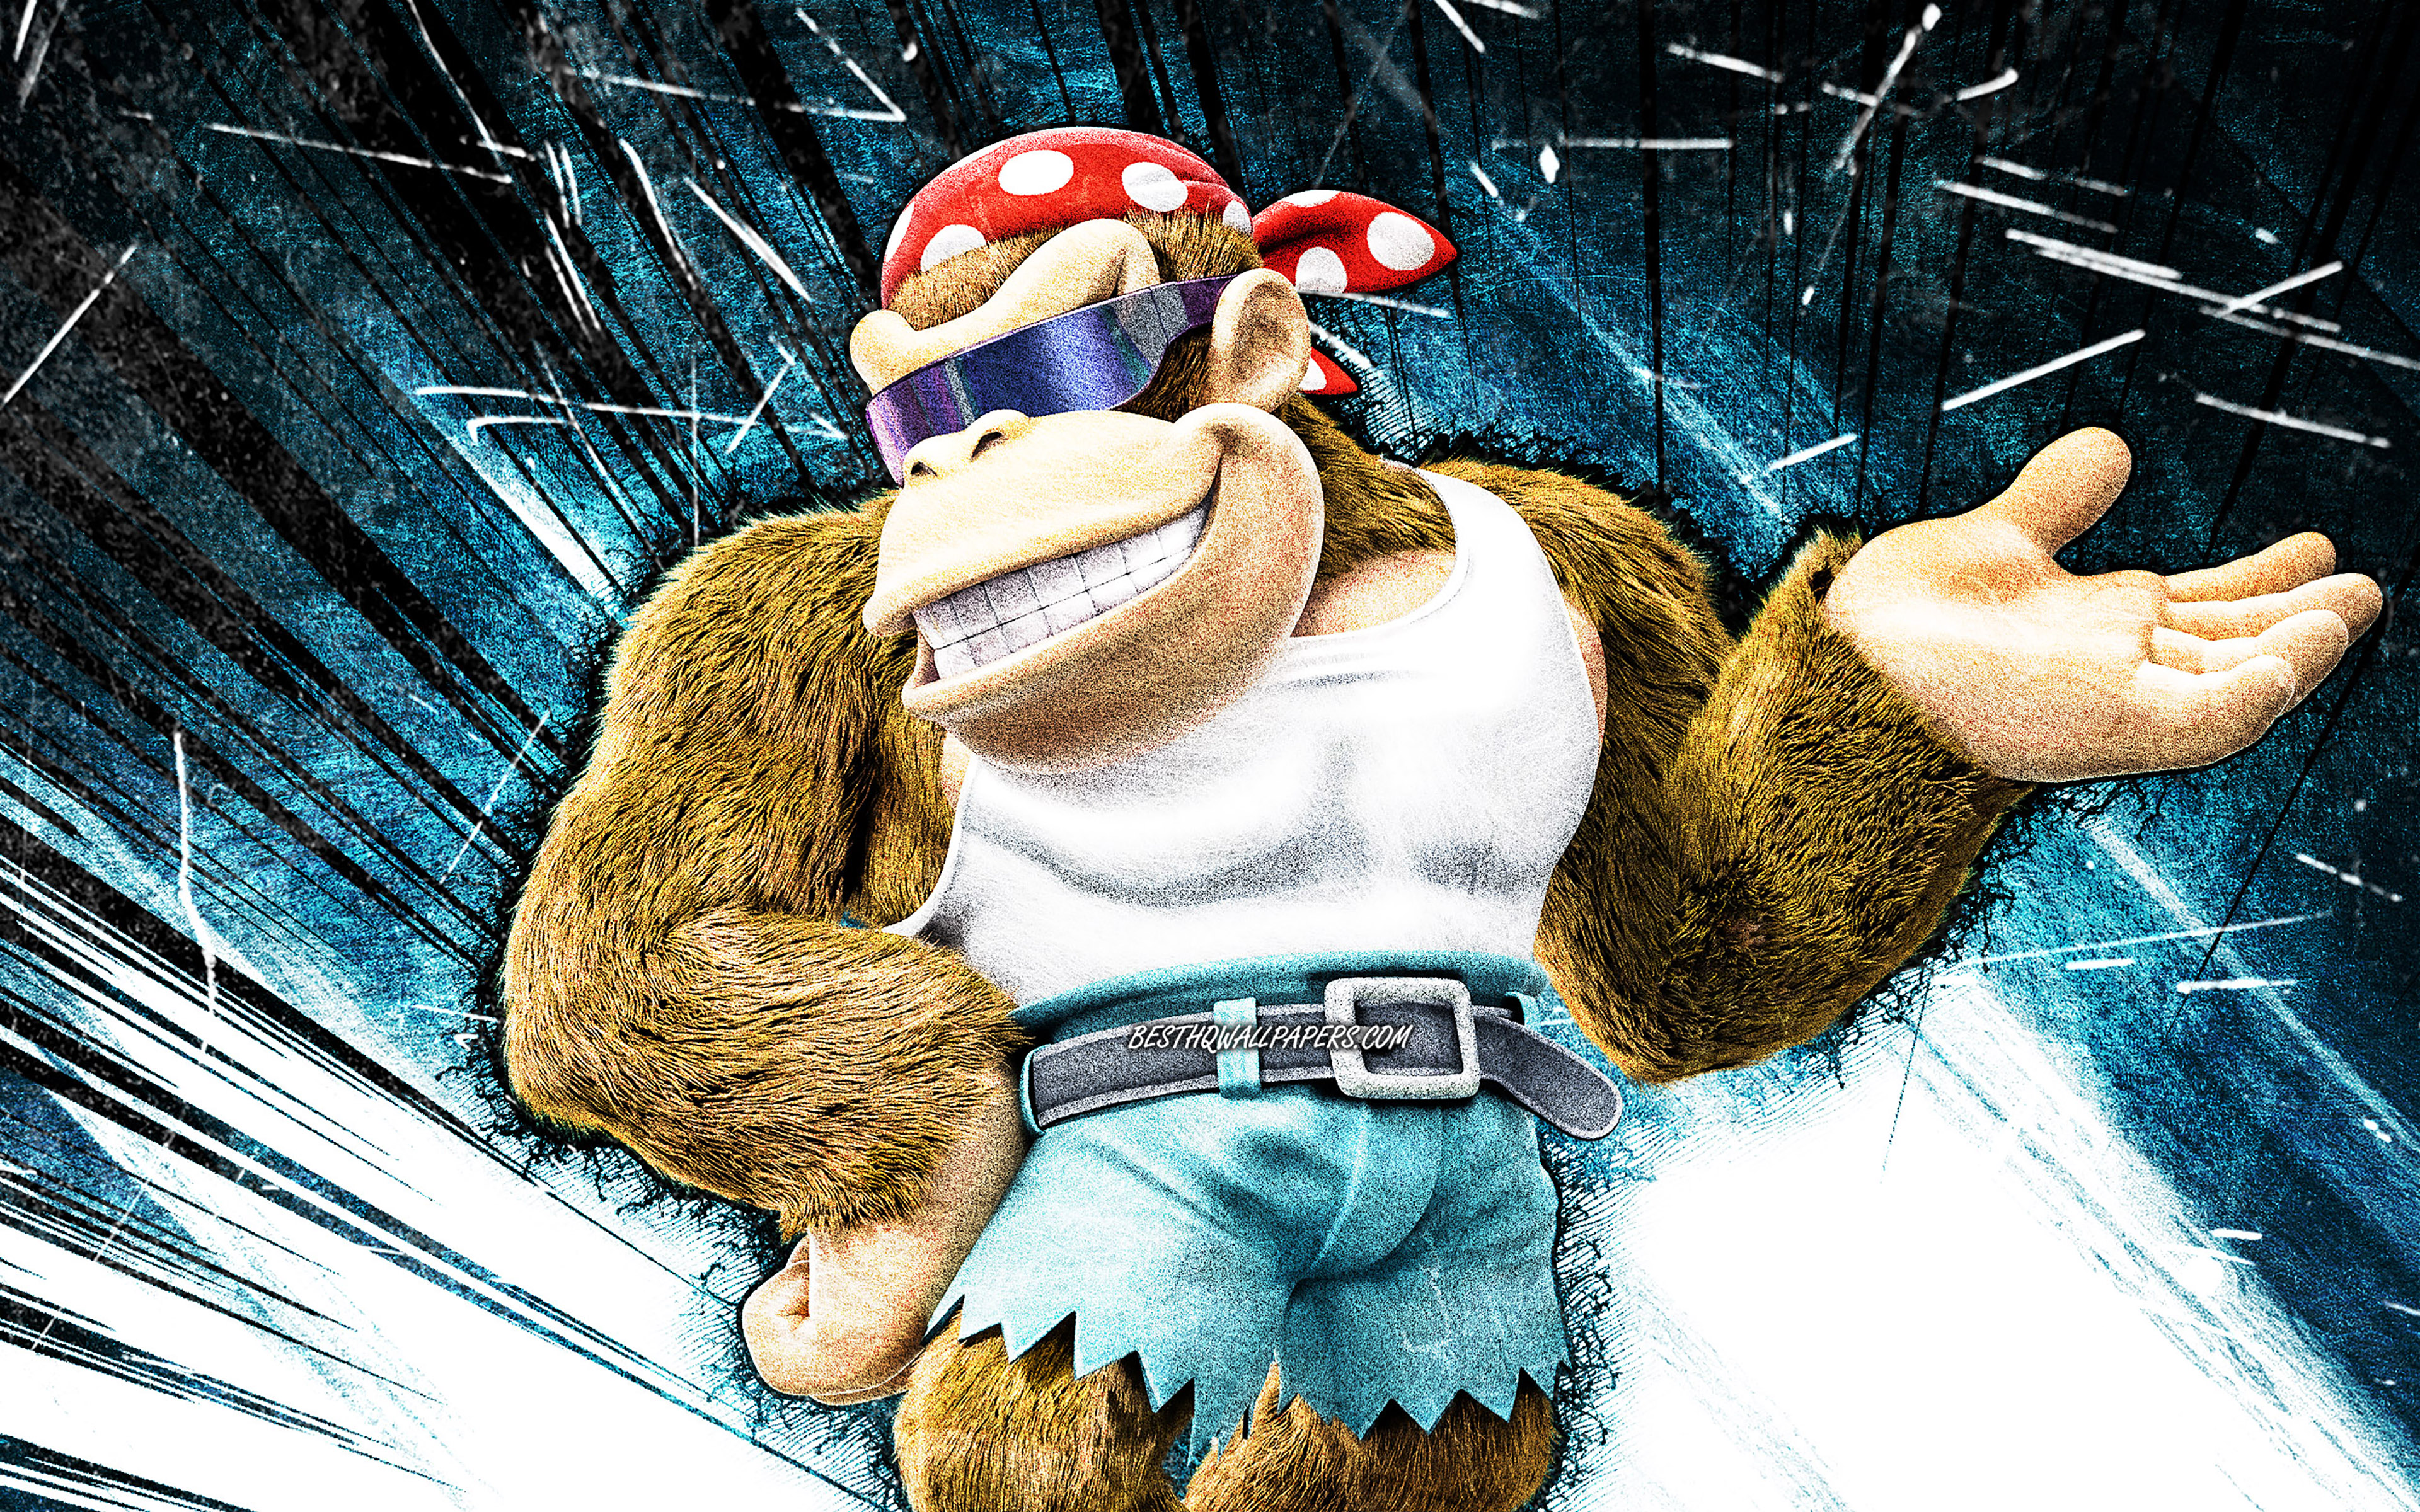 Download wallpaper 4k, Funky Kong, grunge art, Super Mario, creative, Super Mario characters, Super Mario Bros, blue abstract rays, Funky Kong Super Mario for desktop with resolution 3840x2400. High Quality HD picture